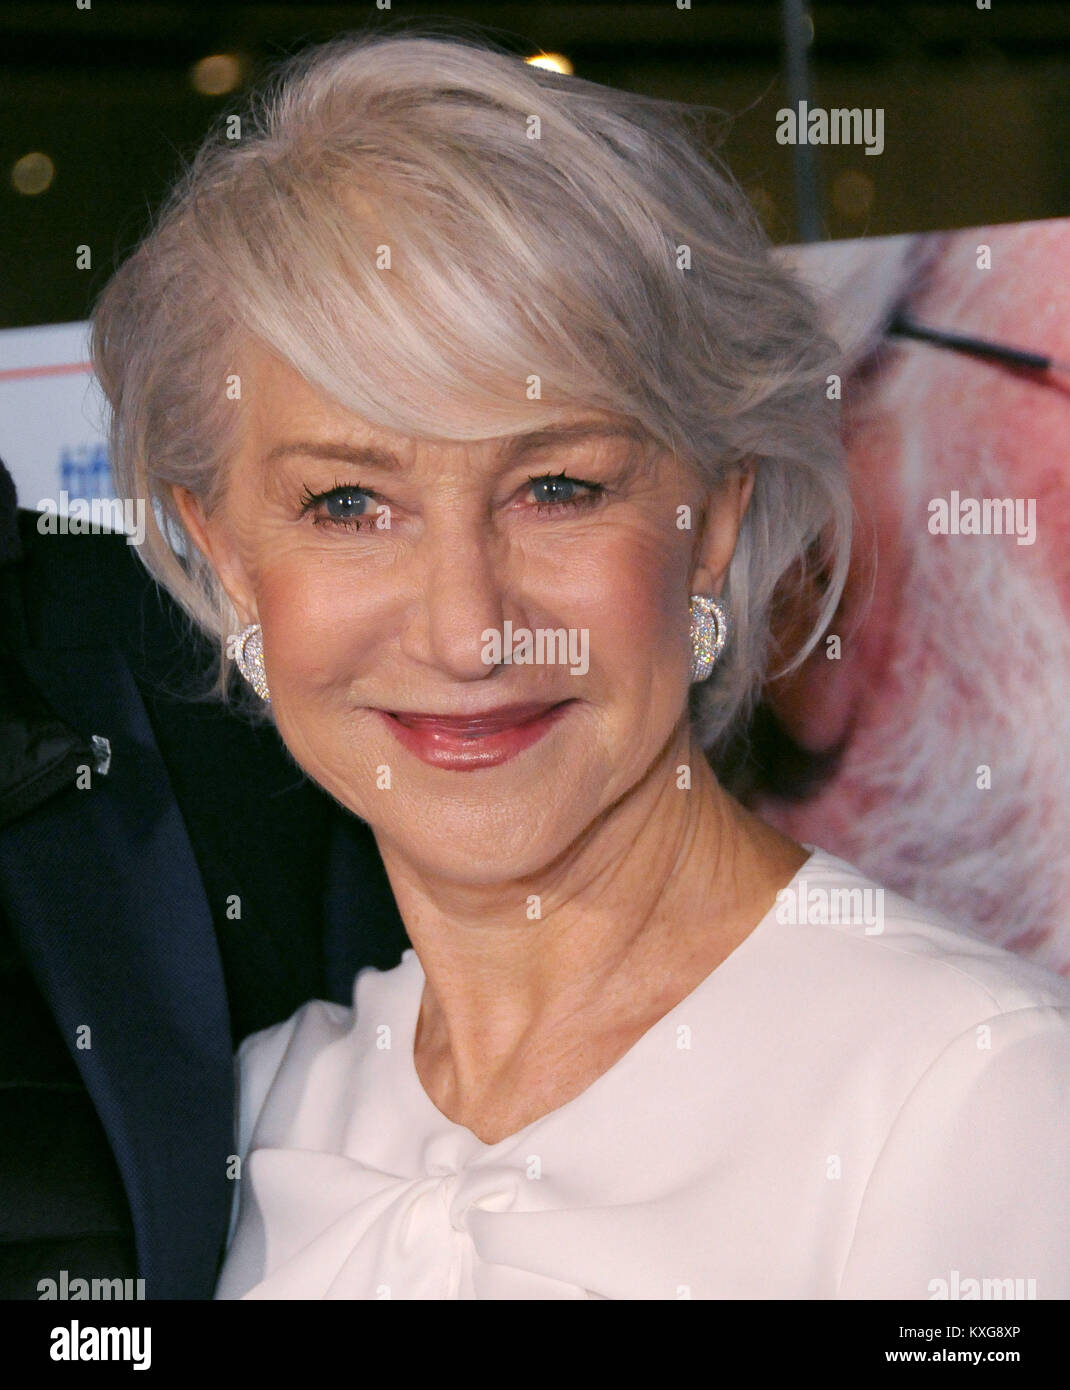 West Hollywood, California, USA. 9th January, 2018. Actress Helen Mirren attends the Los Angeles Premiere of 'The Leisure Seeker' at Pacific Design Center on January 9, 2018 in West Hollywood, California. Photo by Barry King/Alamy Live News Stock Photo